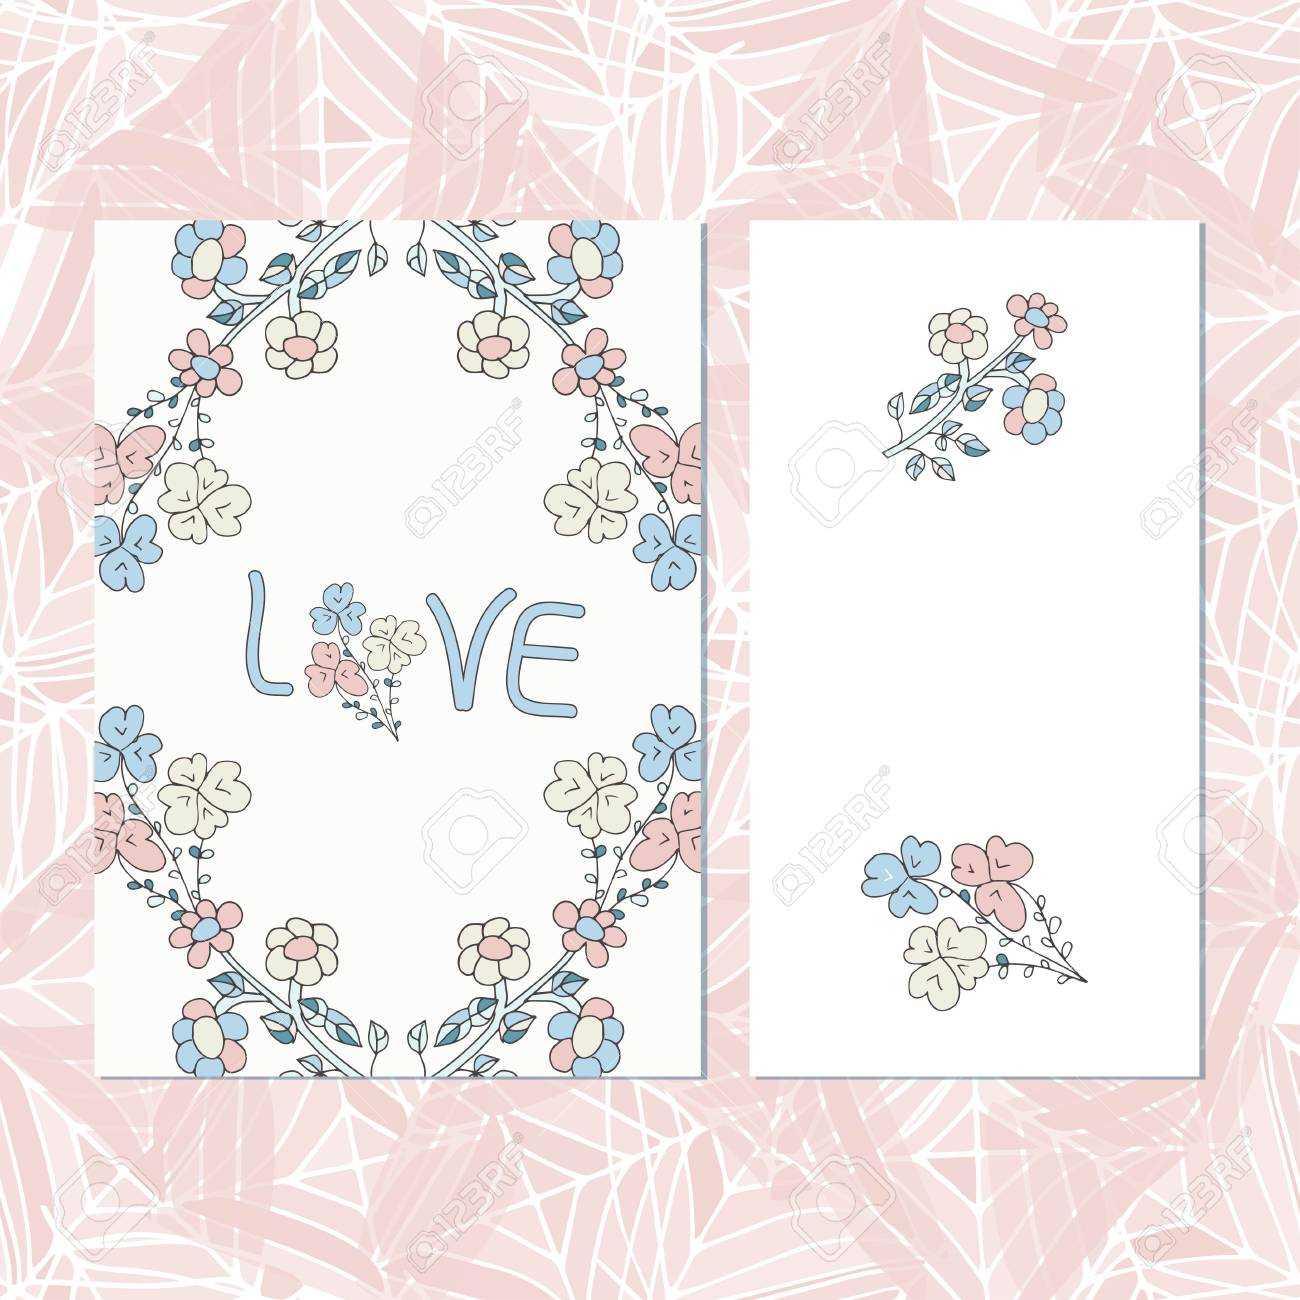 The Template For The Wedding. Invitation, Anniversary Card, Valentine's.. Regarding Template For Anniversary Card